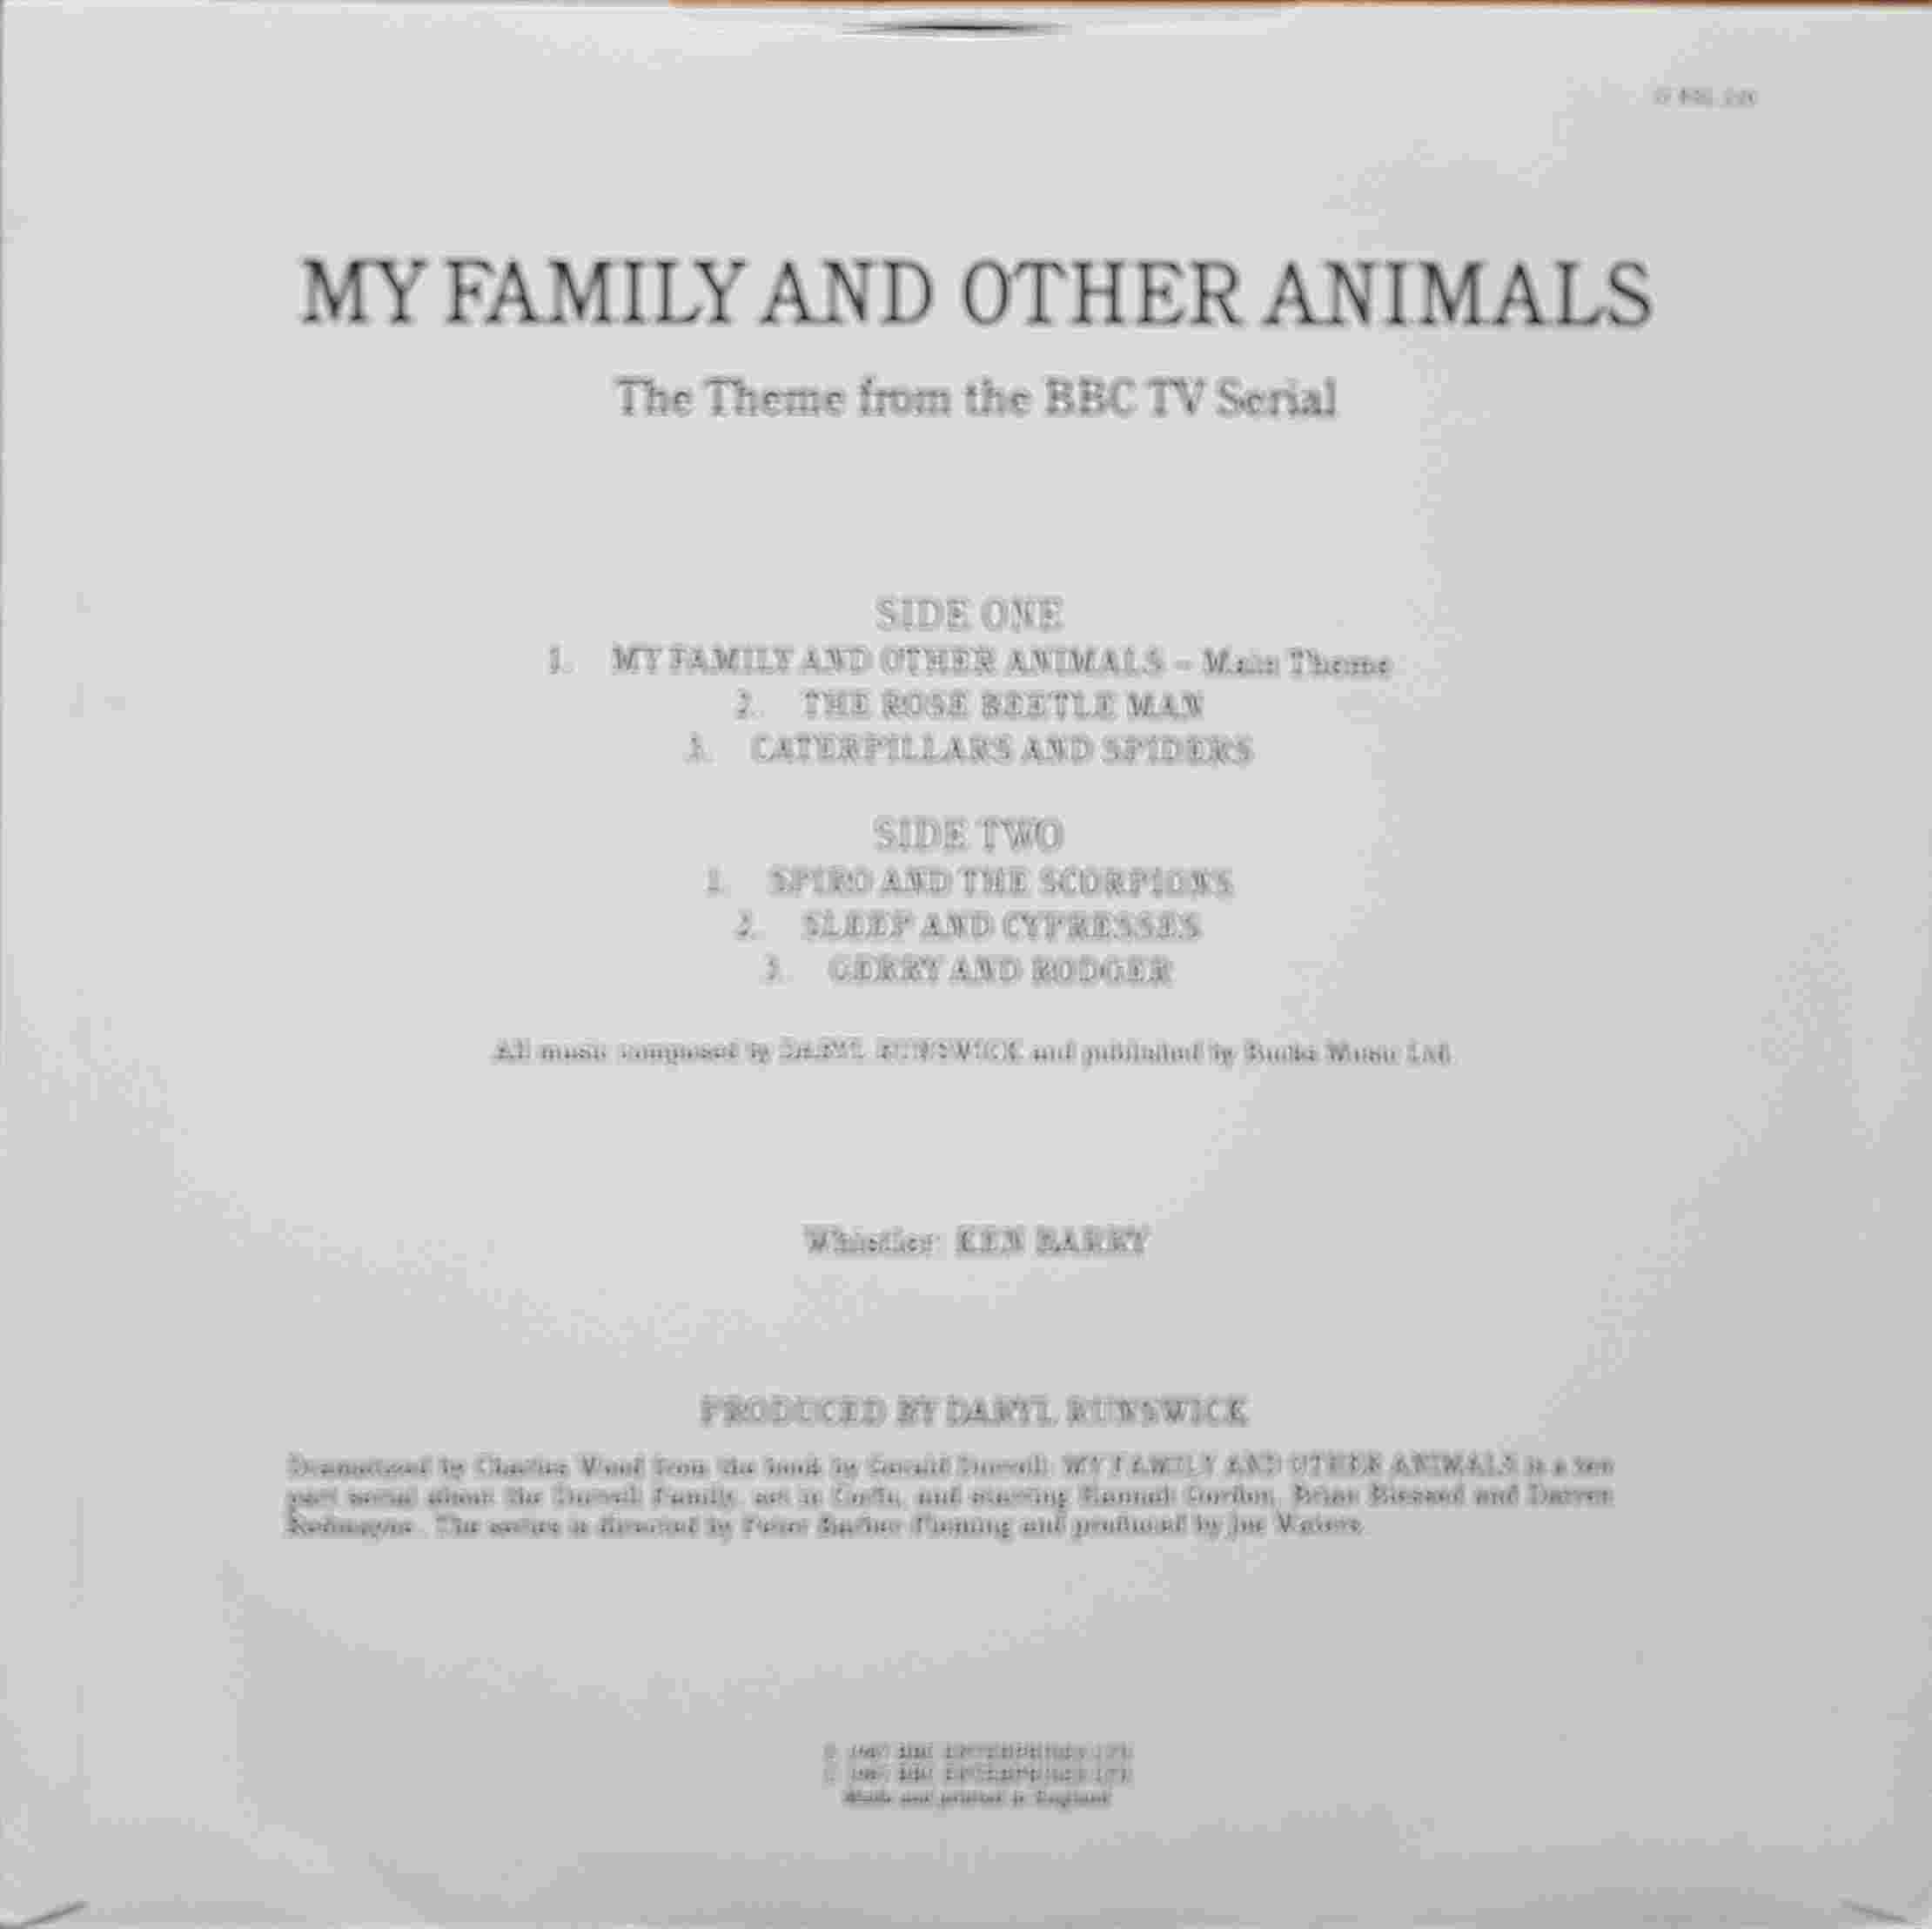 Picture of 12 RSL 220 My family and other animals by artist Daryl Runswick from the BBC records and Tapes library